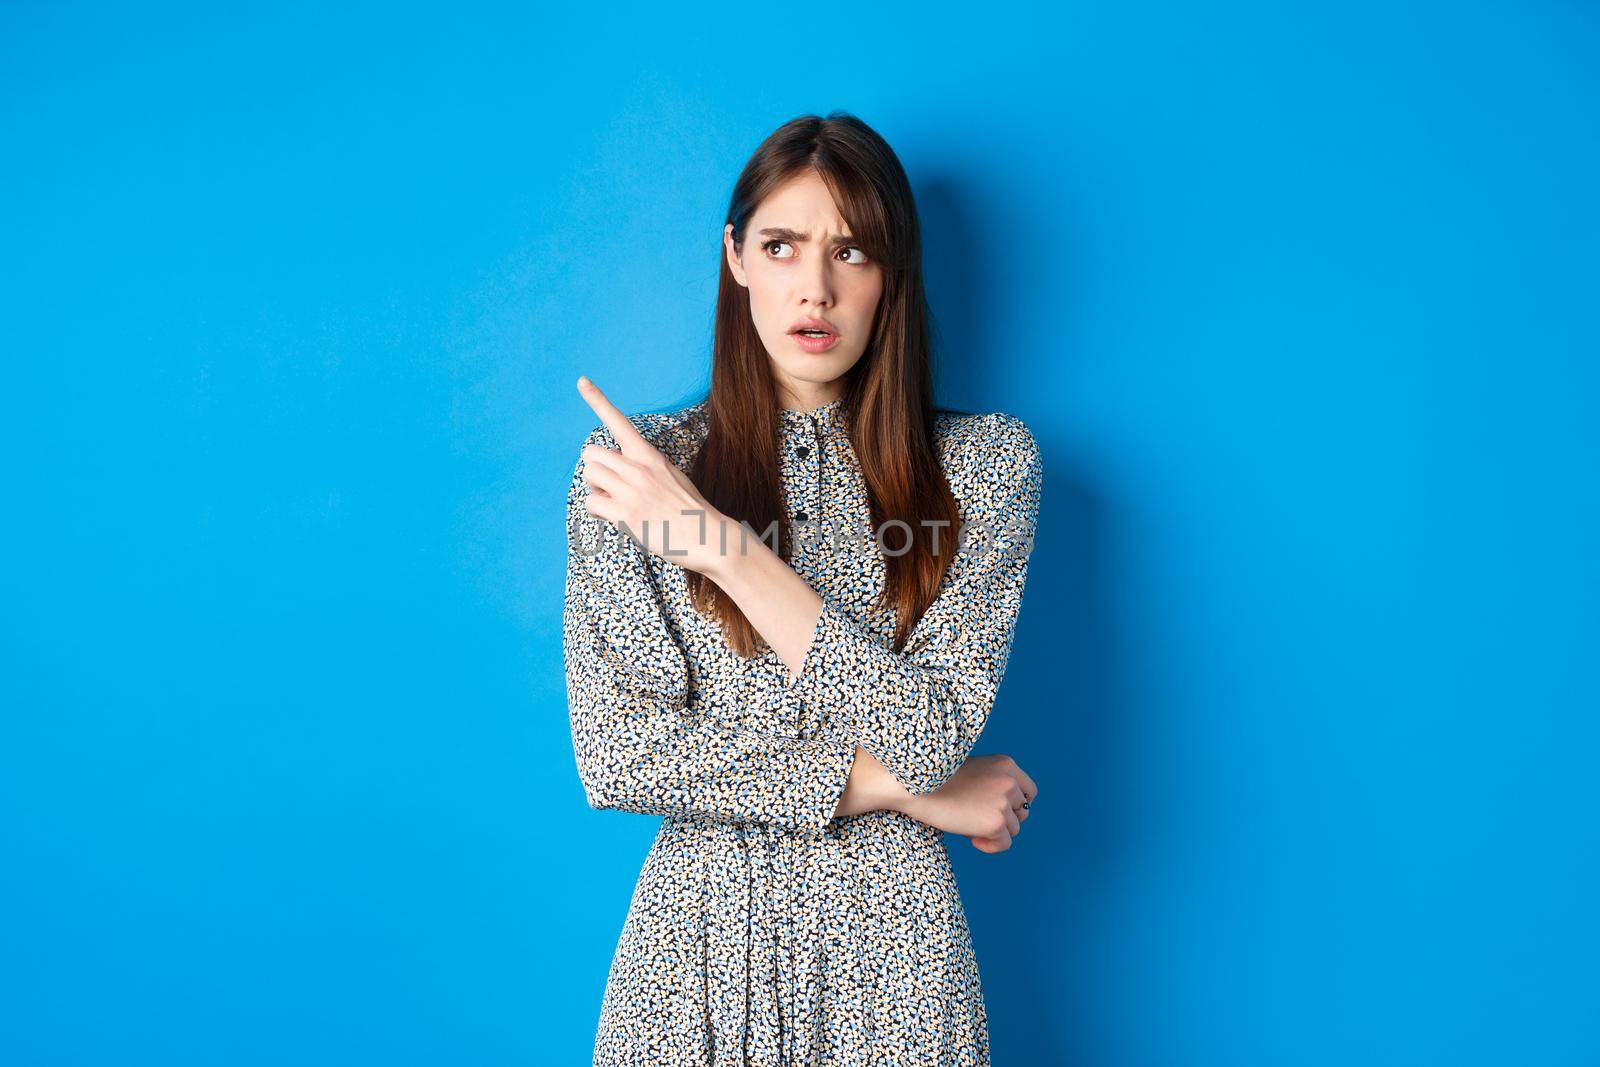 Confused girl in dress pointing and looking at upper left corner with puzzled frowning face, standing hesitant on blue background.